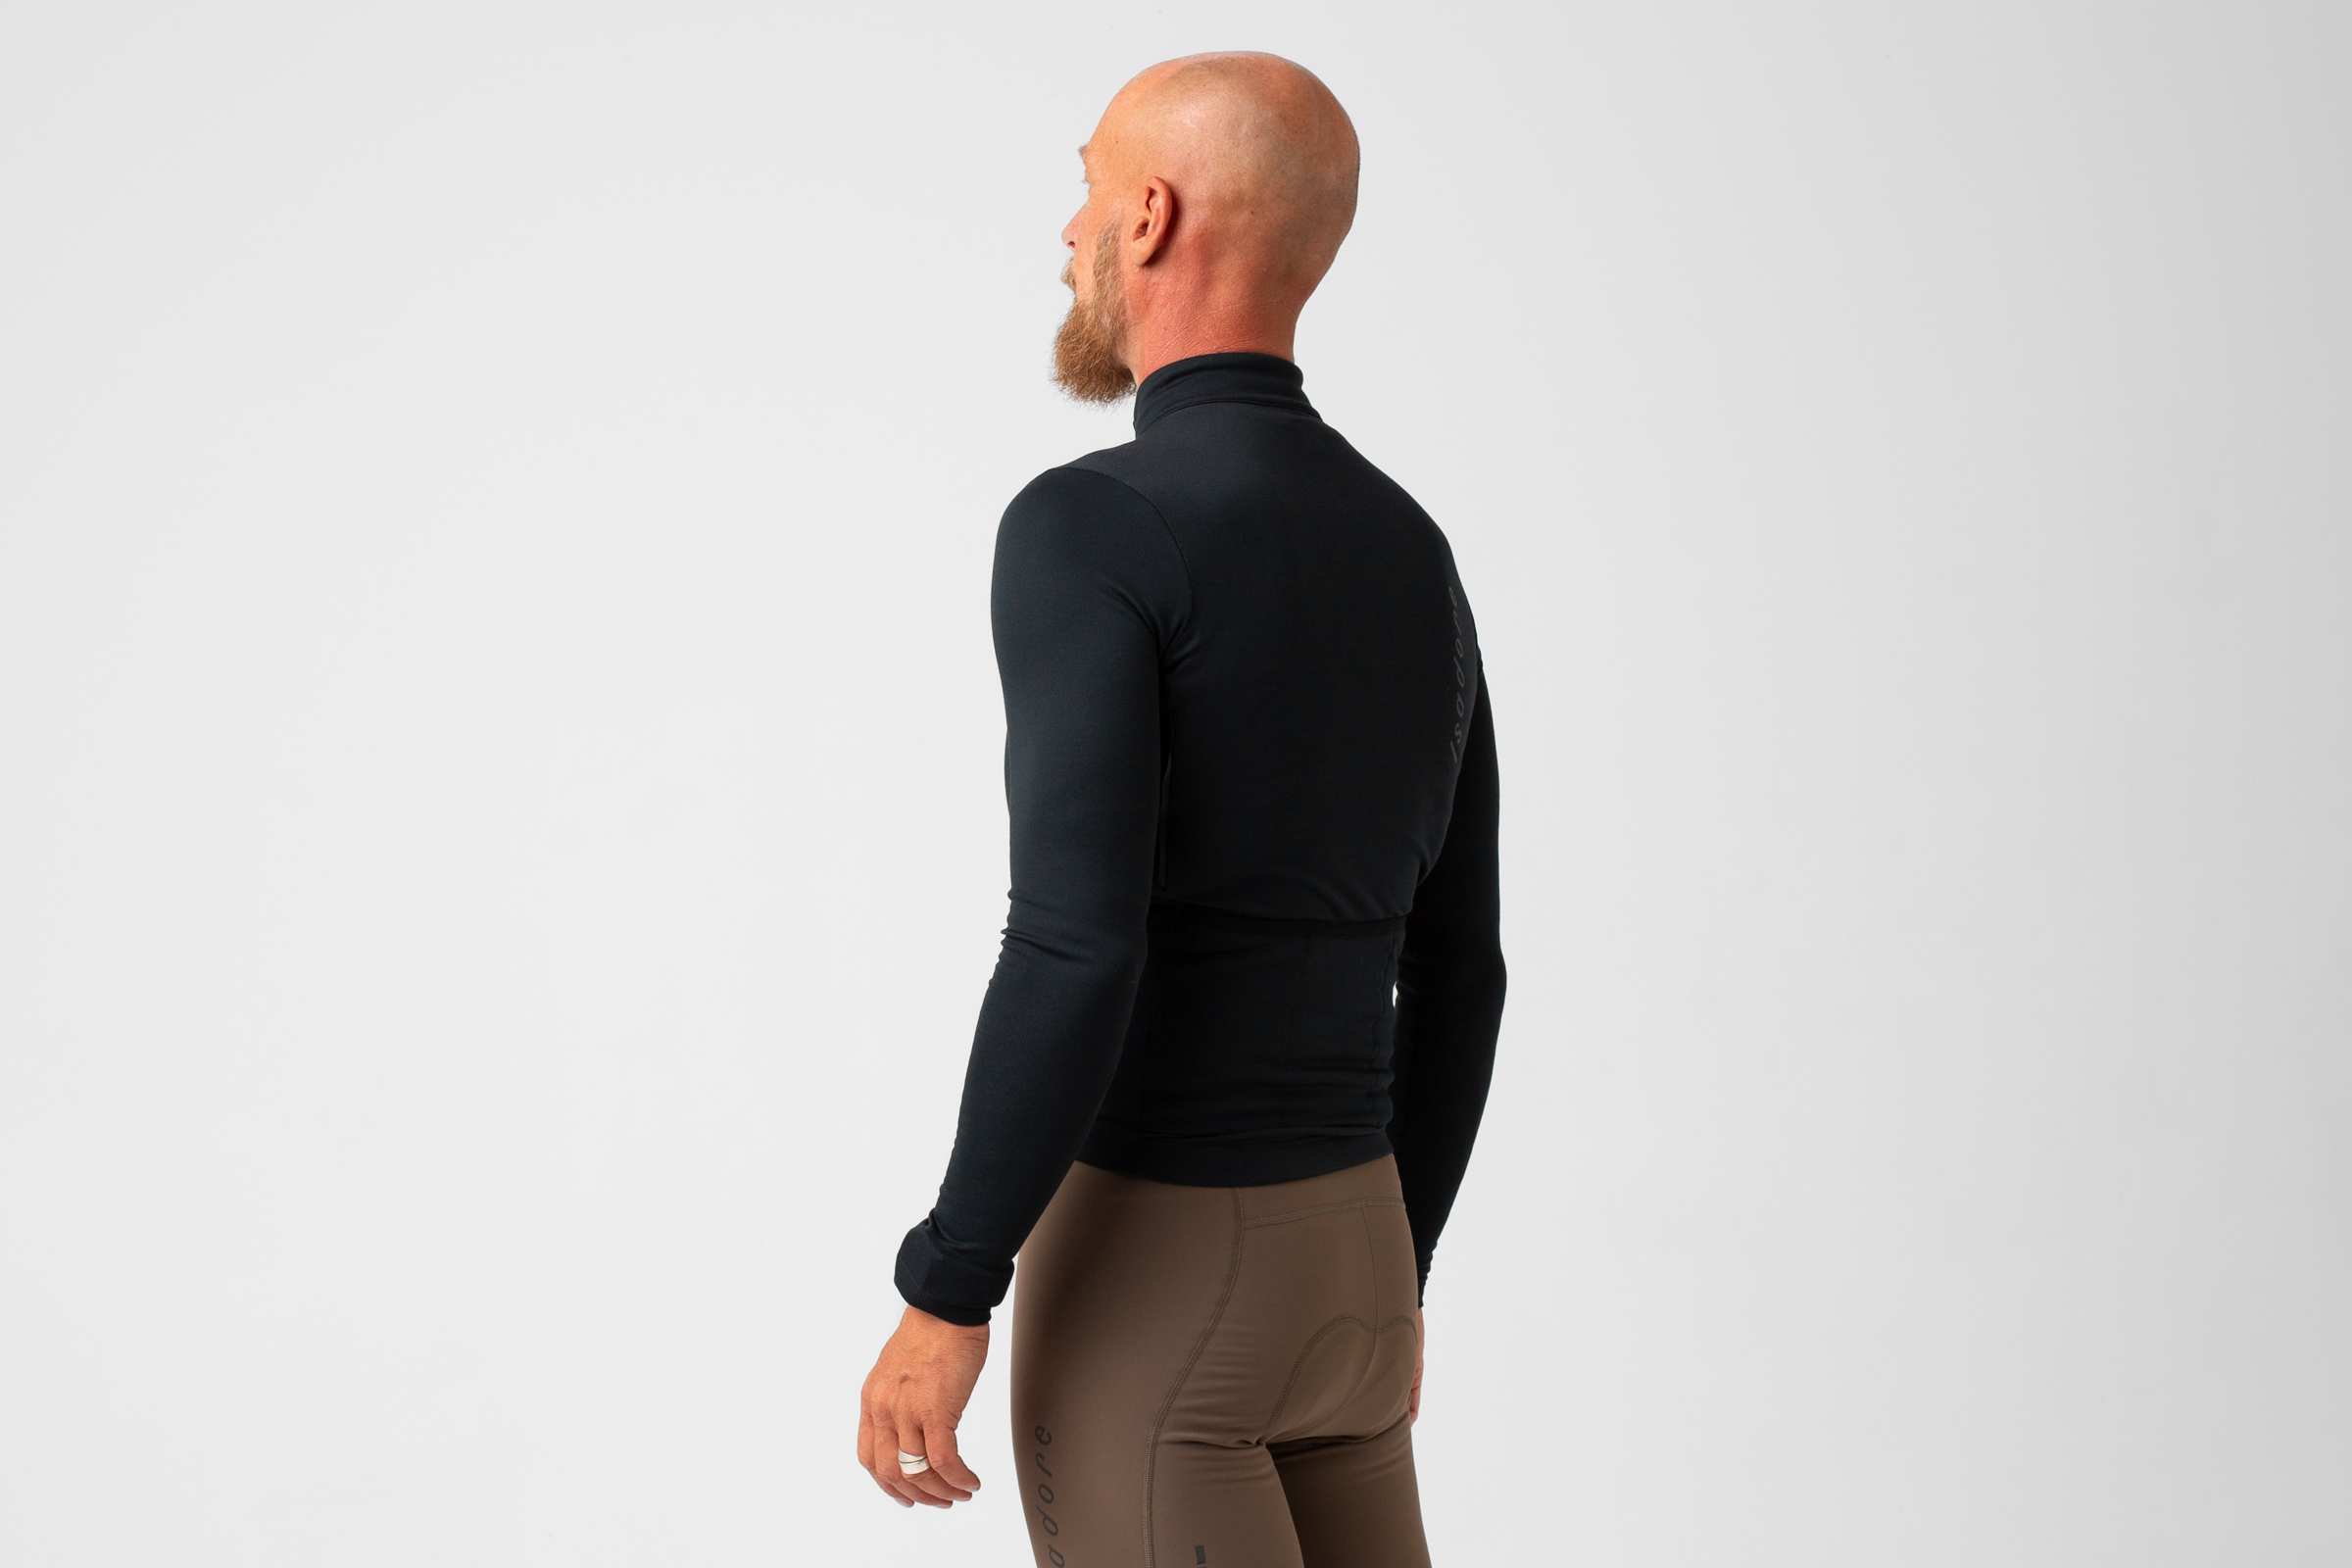 Signature Thermal Long Sleeve Jersey Anthracite